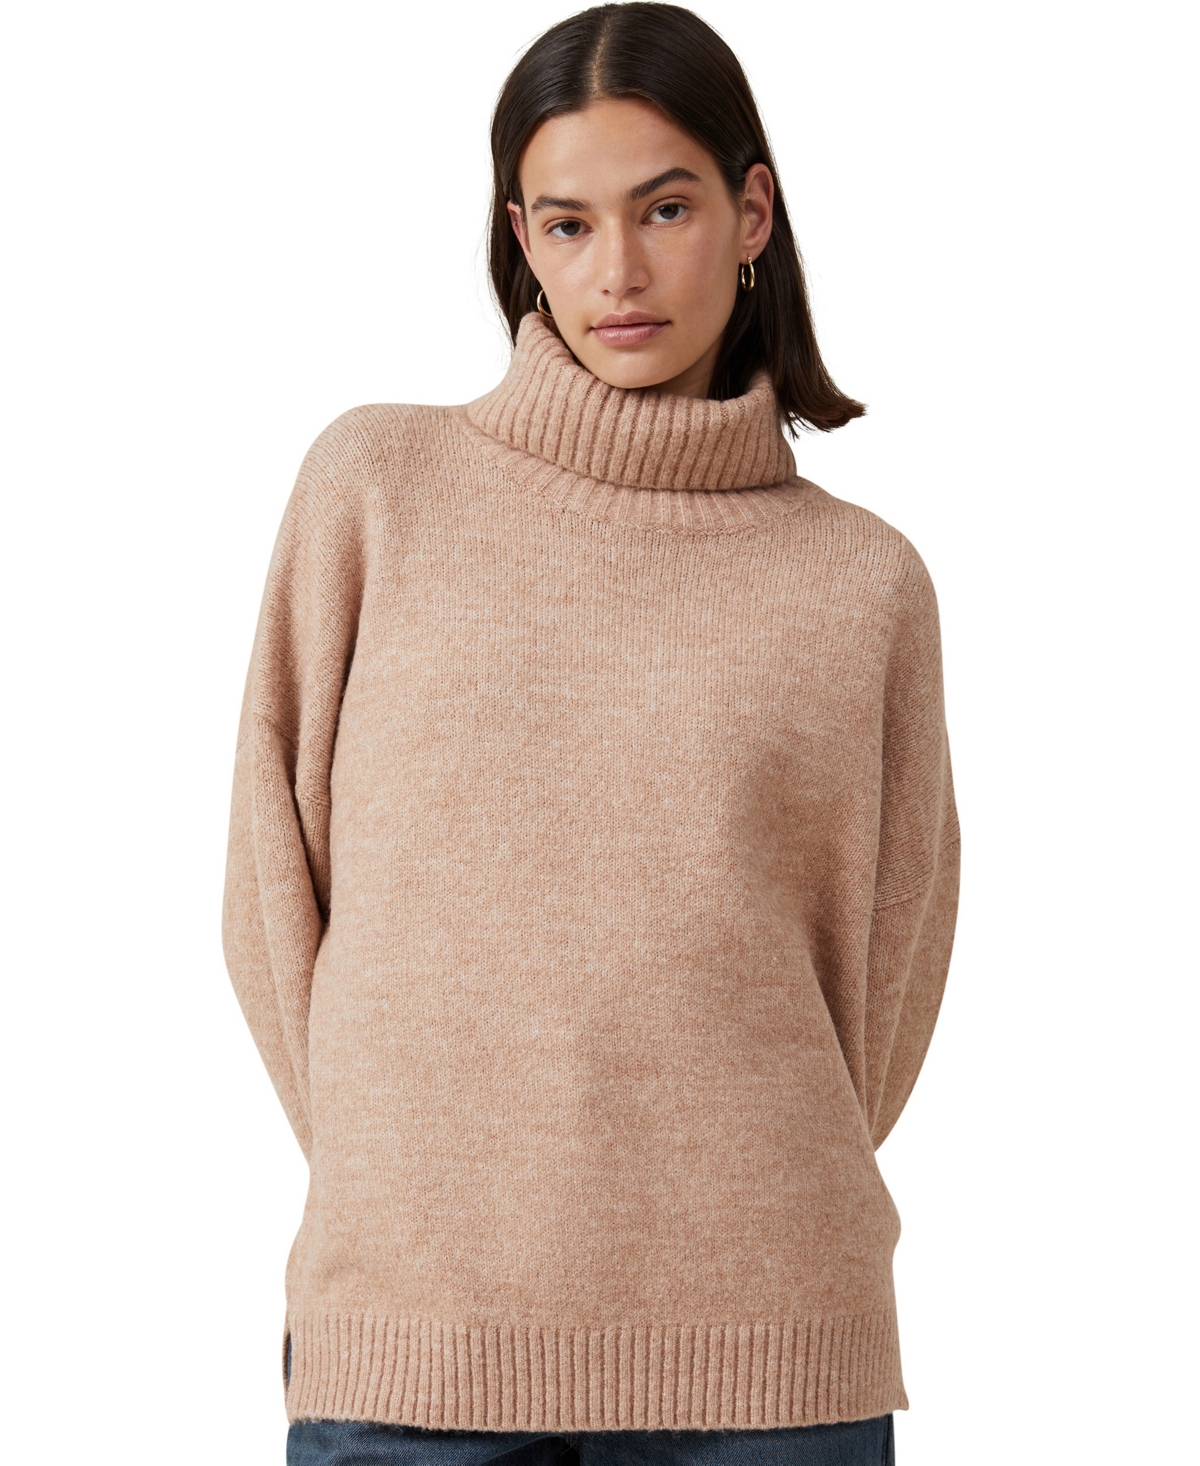 Women's Everything Roll Neck Sweater - Chestnut Marle